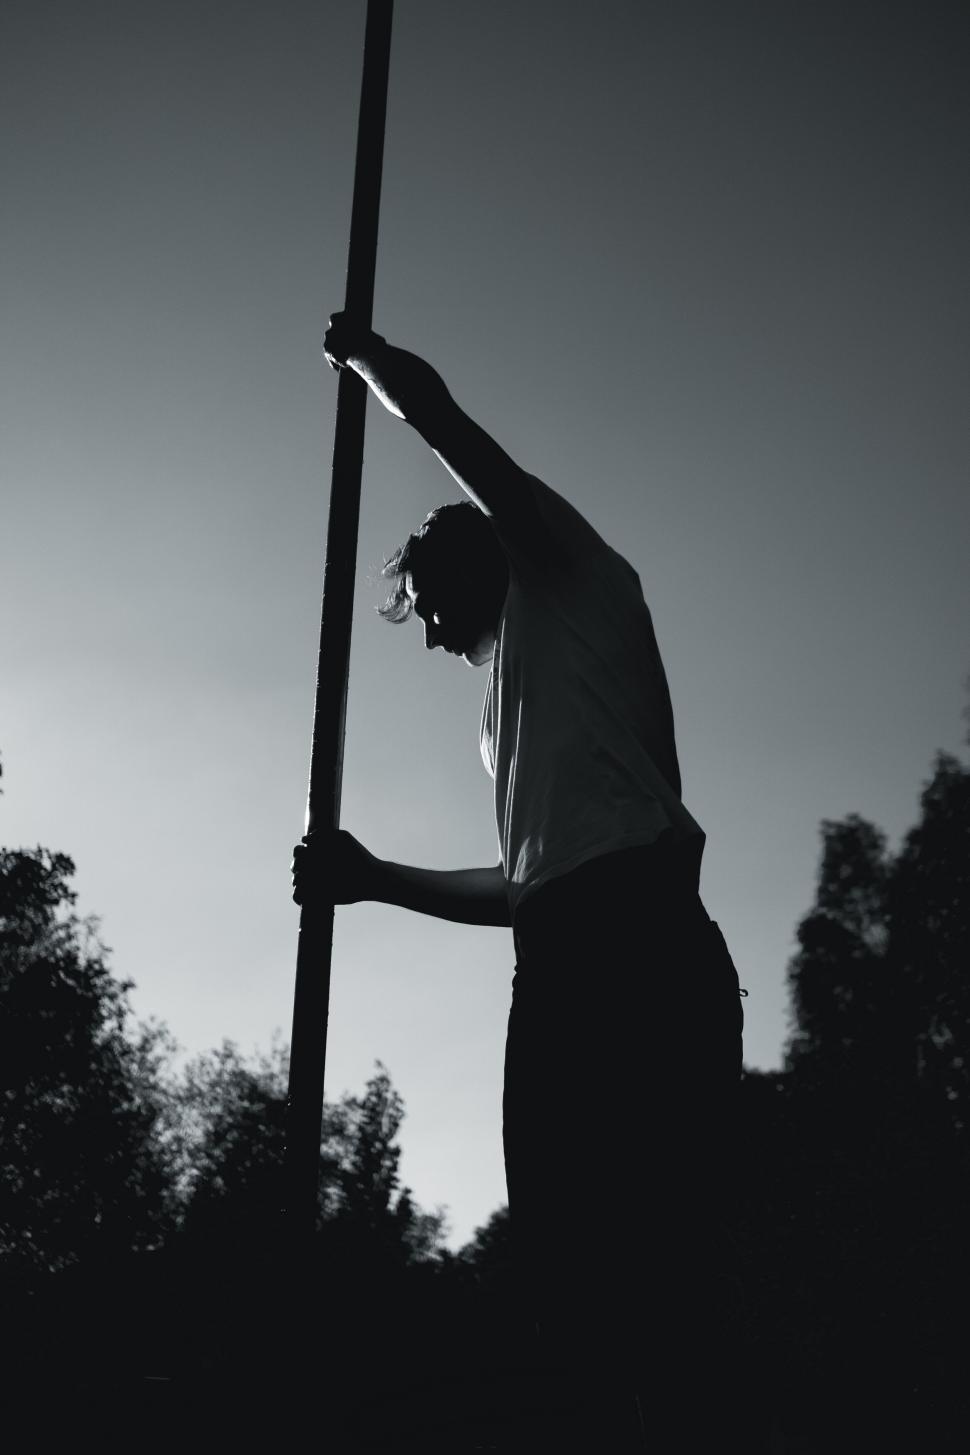 Free Image of Man leaning on pole in silhouette against sky 